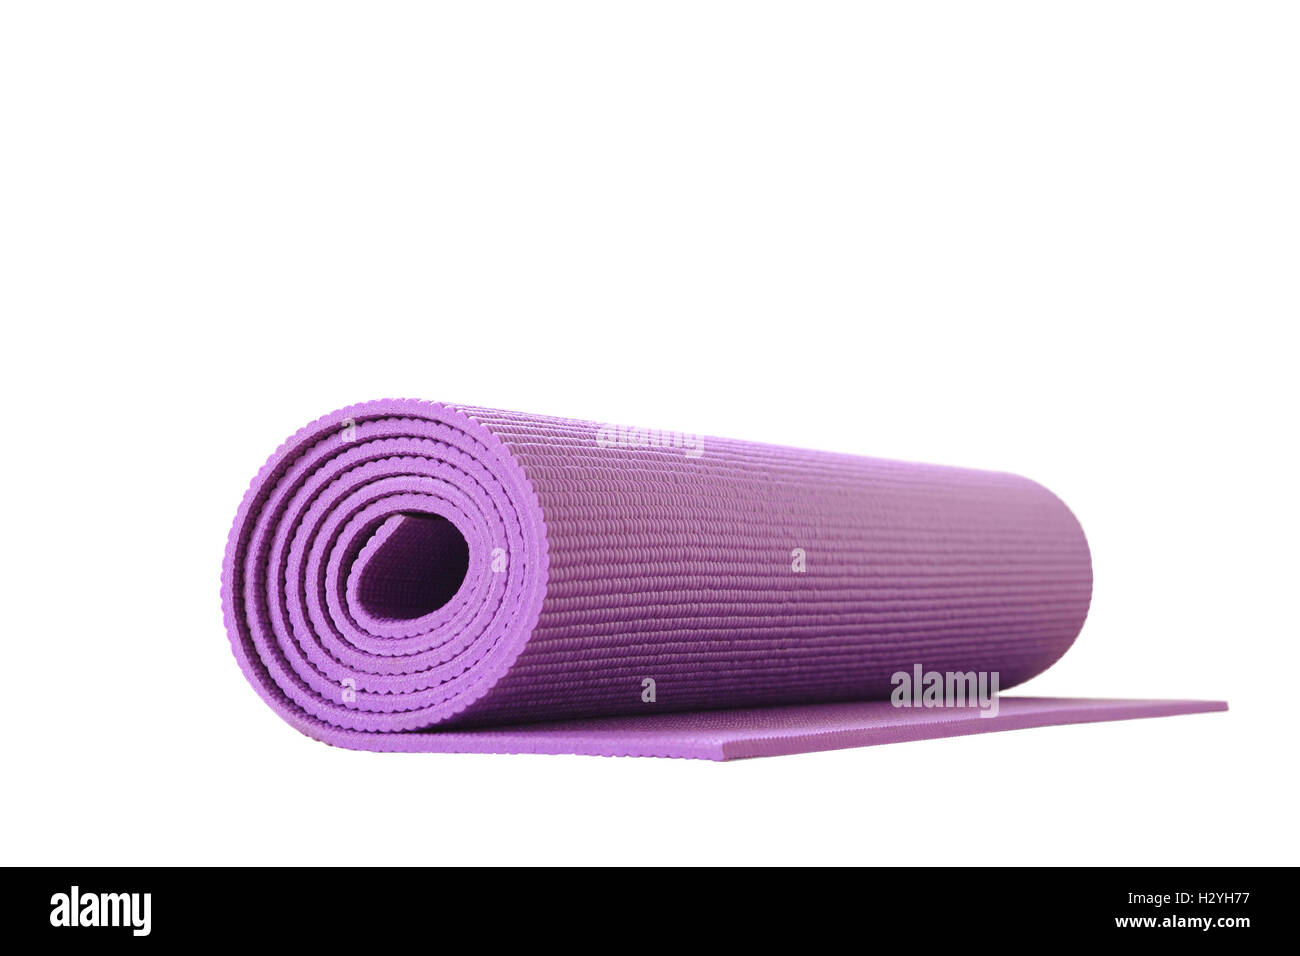 top view yoga mat roll on black rubber background, Purple yoga mat